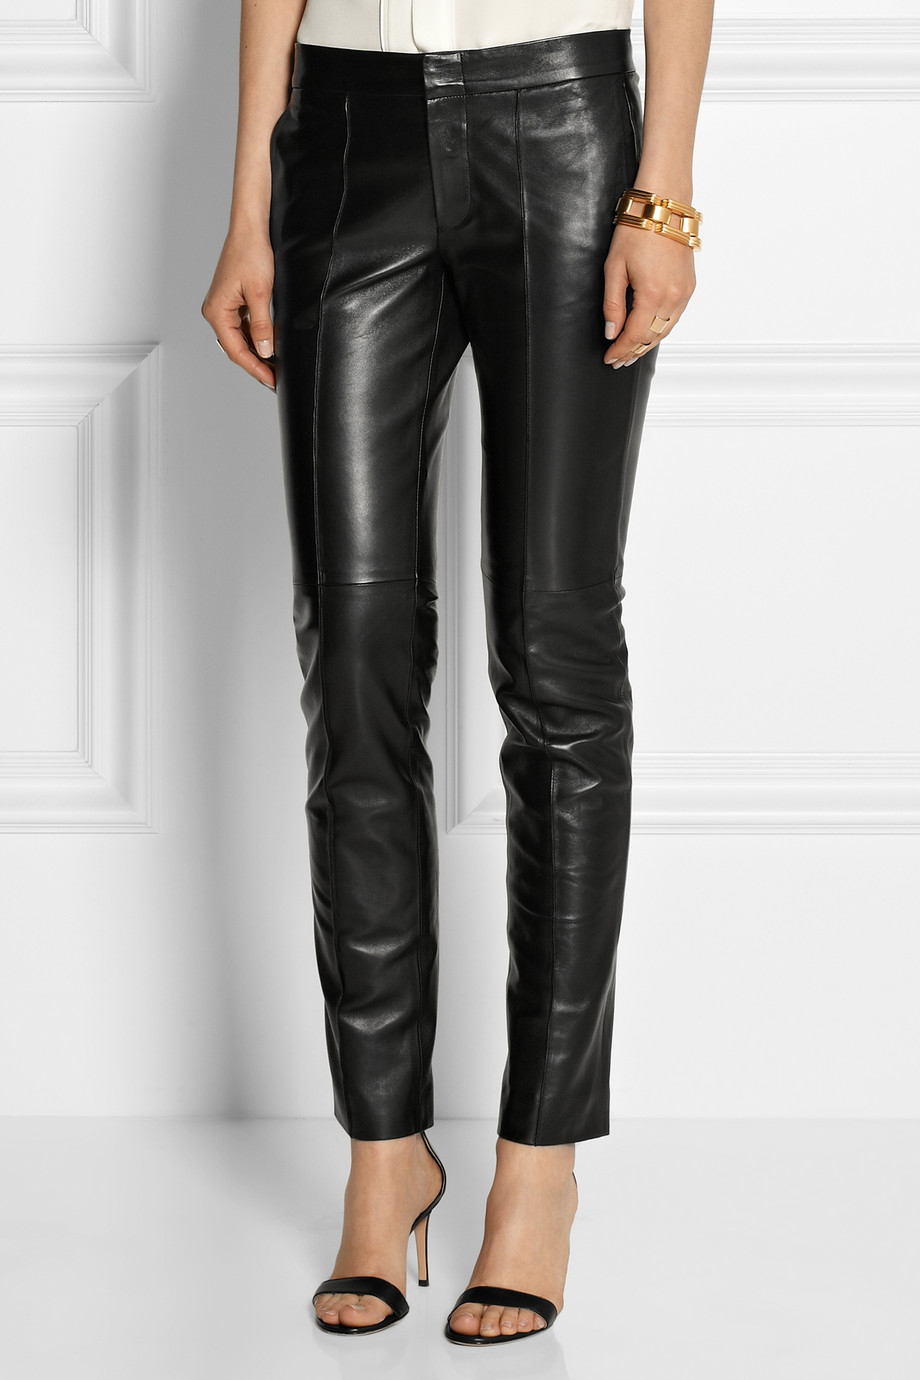 Gucci Tailored Mid-rise Leather Skinny Pants in Black | Lyst